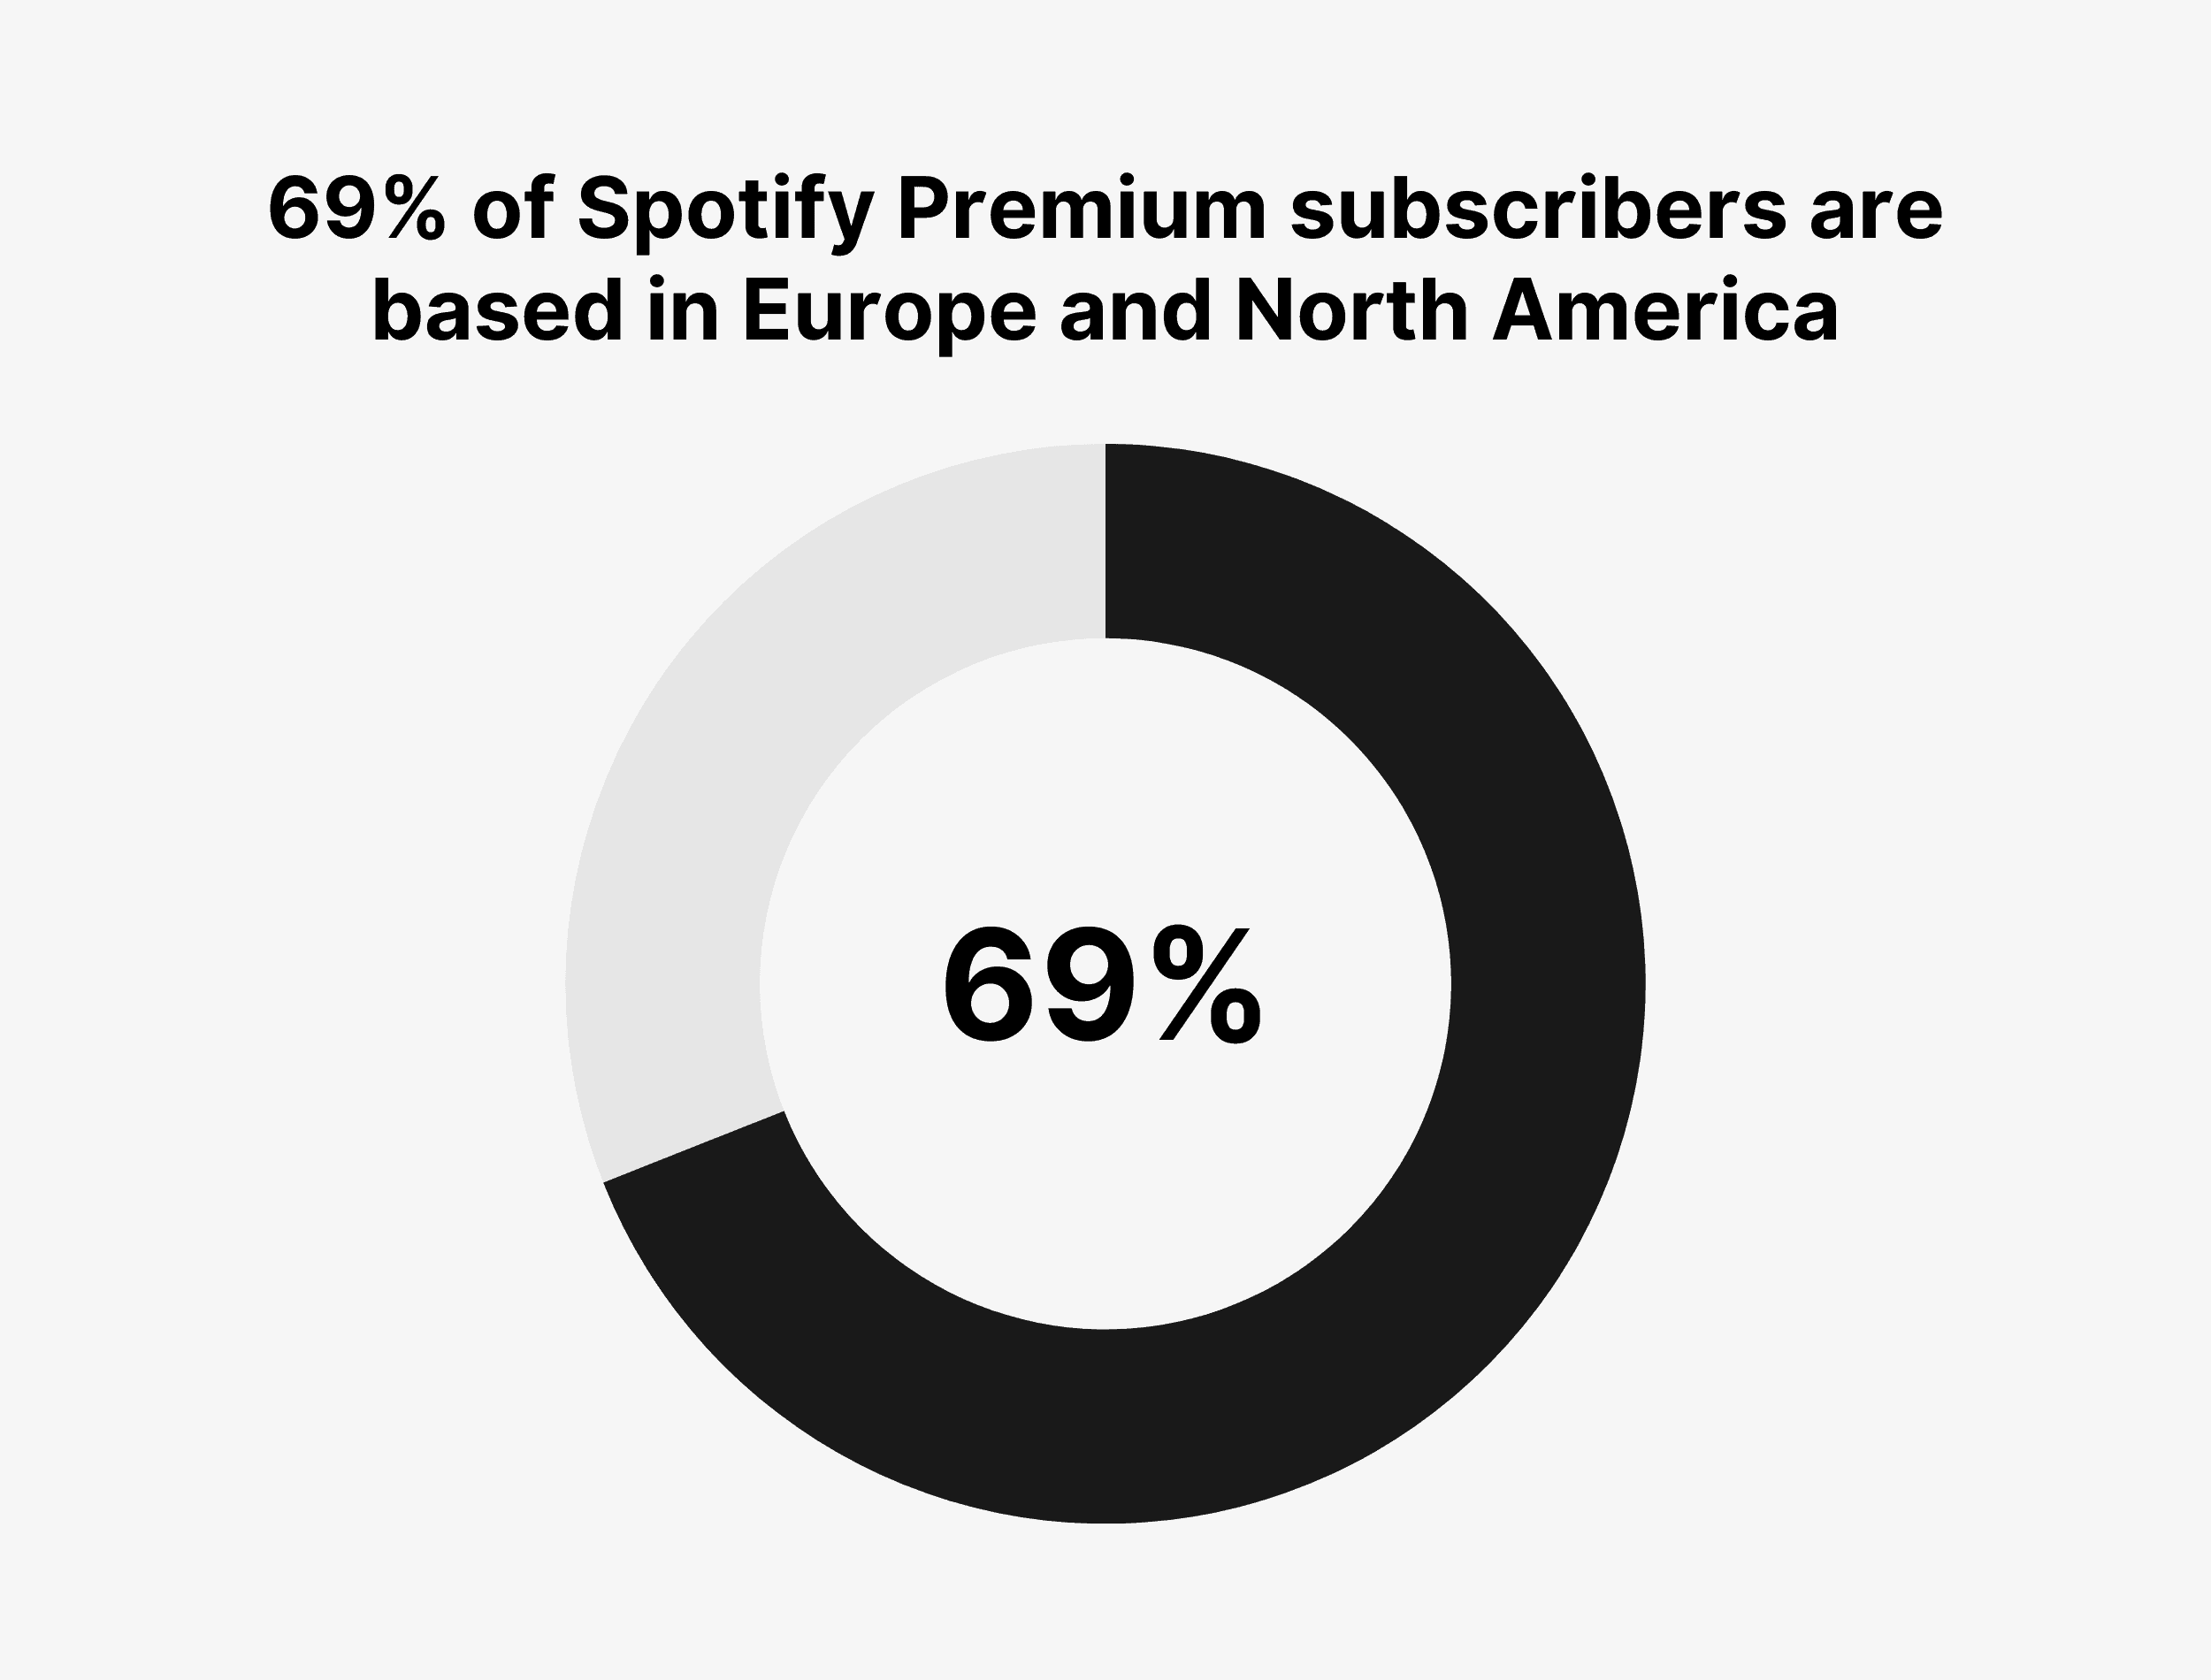 69% of Spotify Premium subscribers are based in Europe and North America